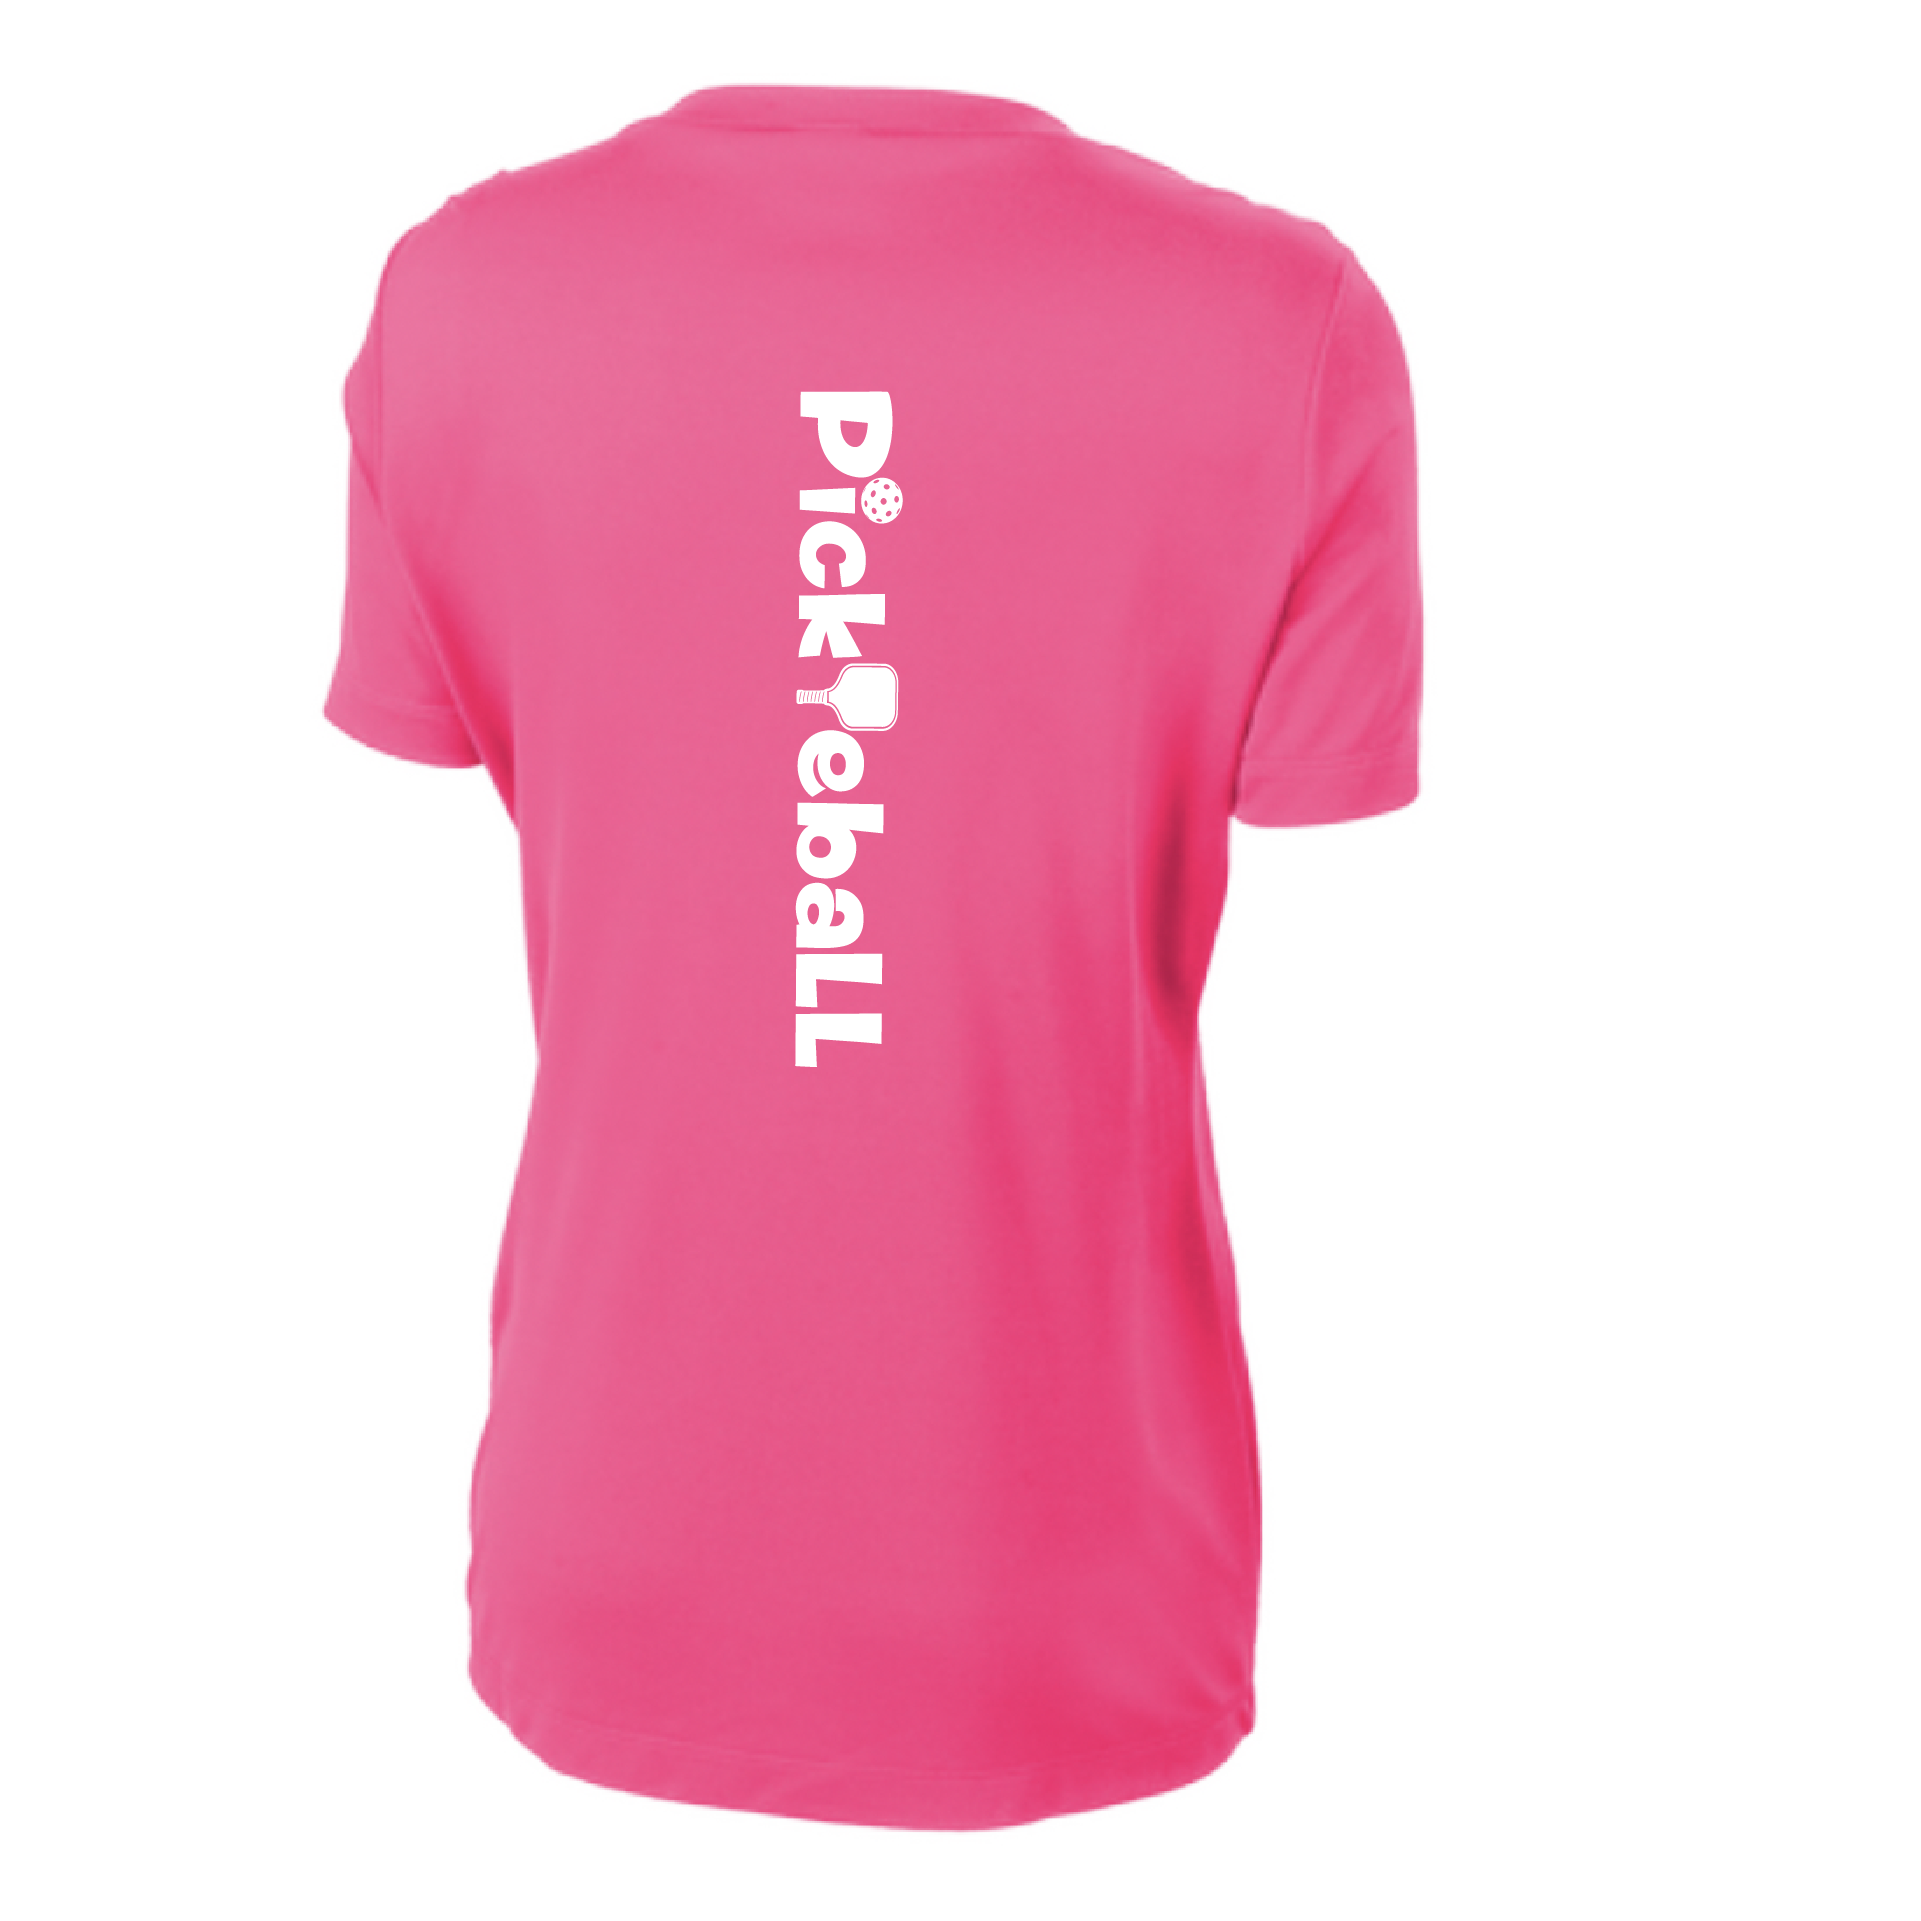 Pickleball Design: Pickleball Horizontal Customizable location  Women's Style: Short-Sleeve Crew-Neck  Turn up the volume in this Women's shirt with its perfect mix of softness and attitude. Material is ultra-comfortable with moisture wicking properties and tri-blend softness. PosiCharge technology locks in color. Highly breathable and lightweight.